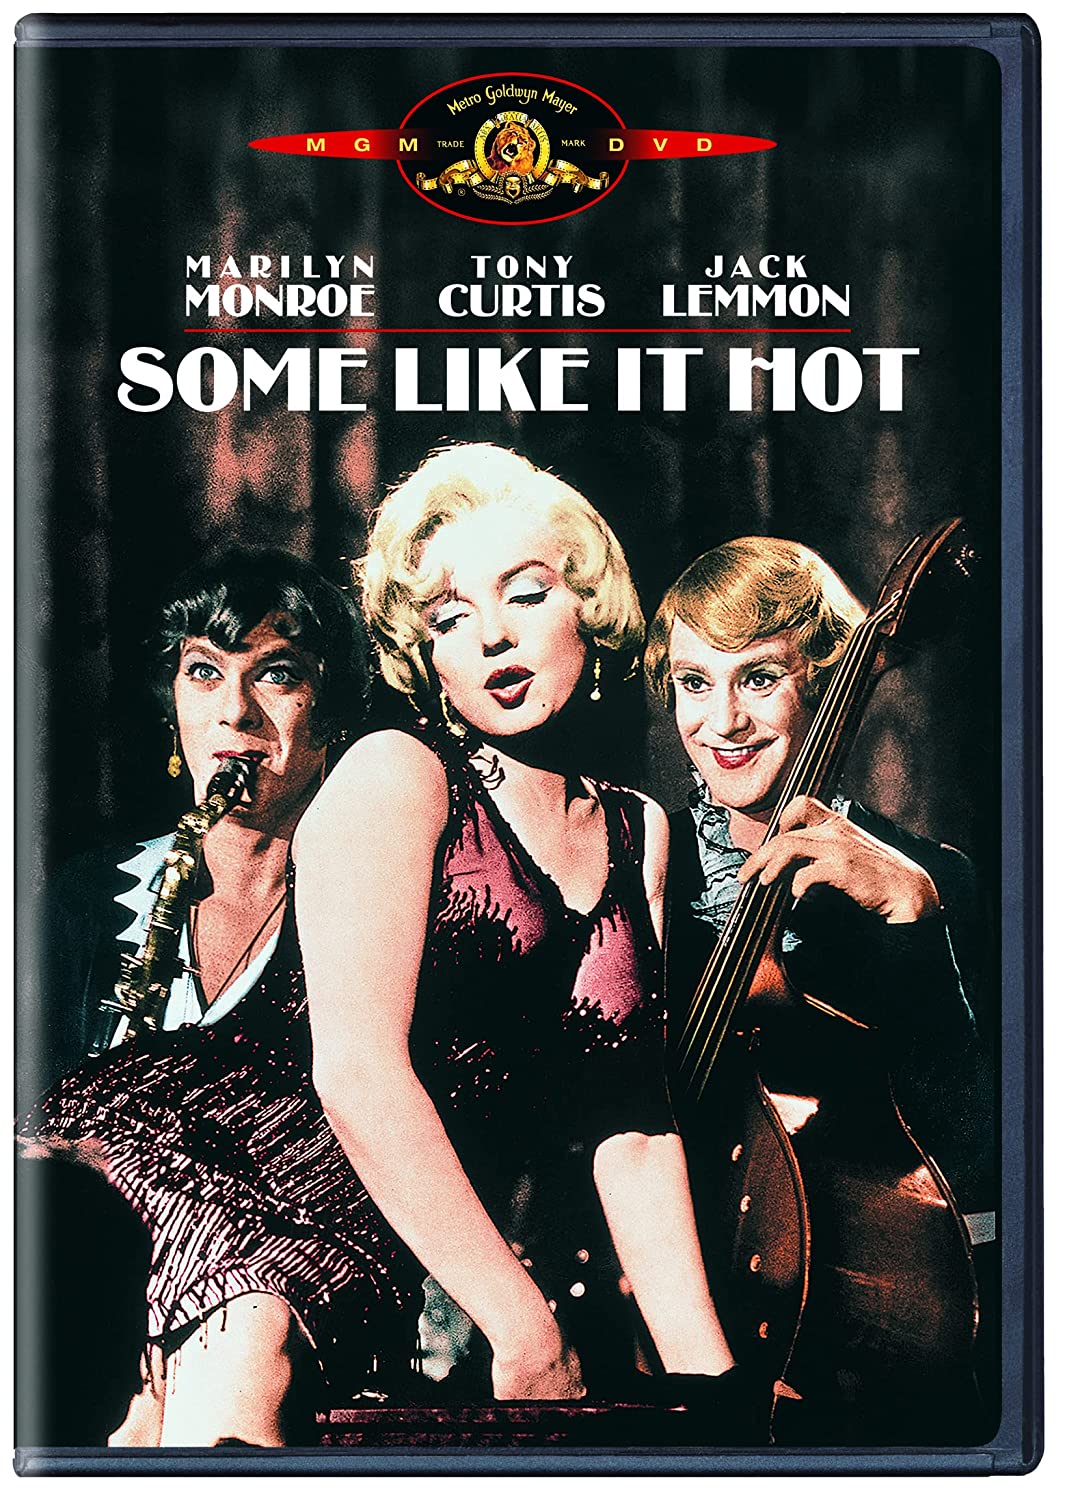 Some Like It Hot (DVD 50th Anniversary Edition) - DVD [ 1959 ]  - Modern Classic Movies On DVD - Movies On GRUV